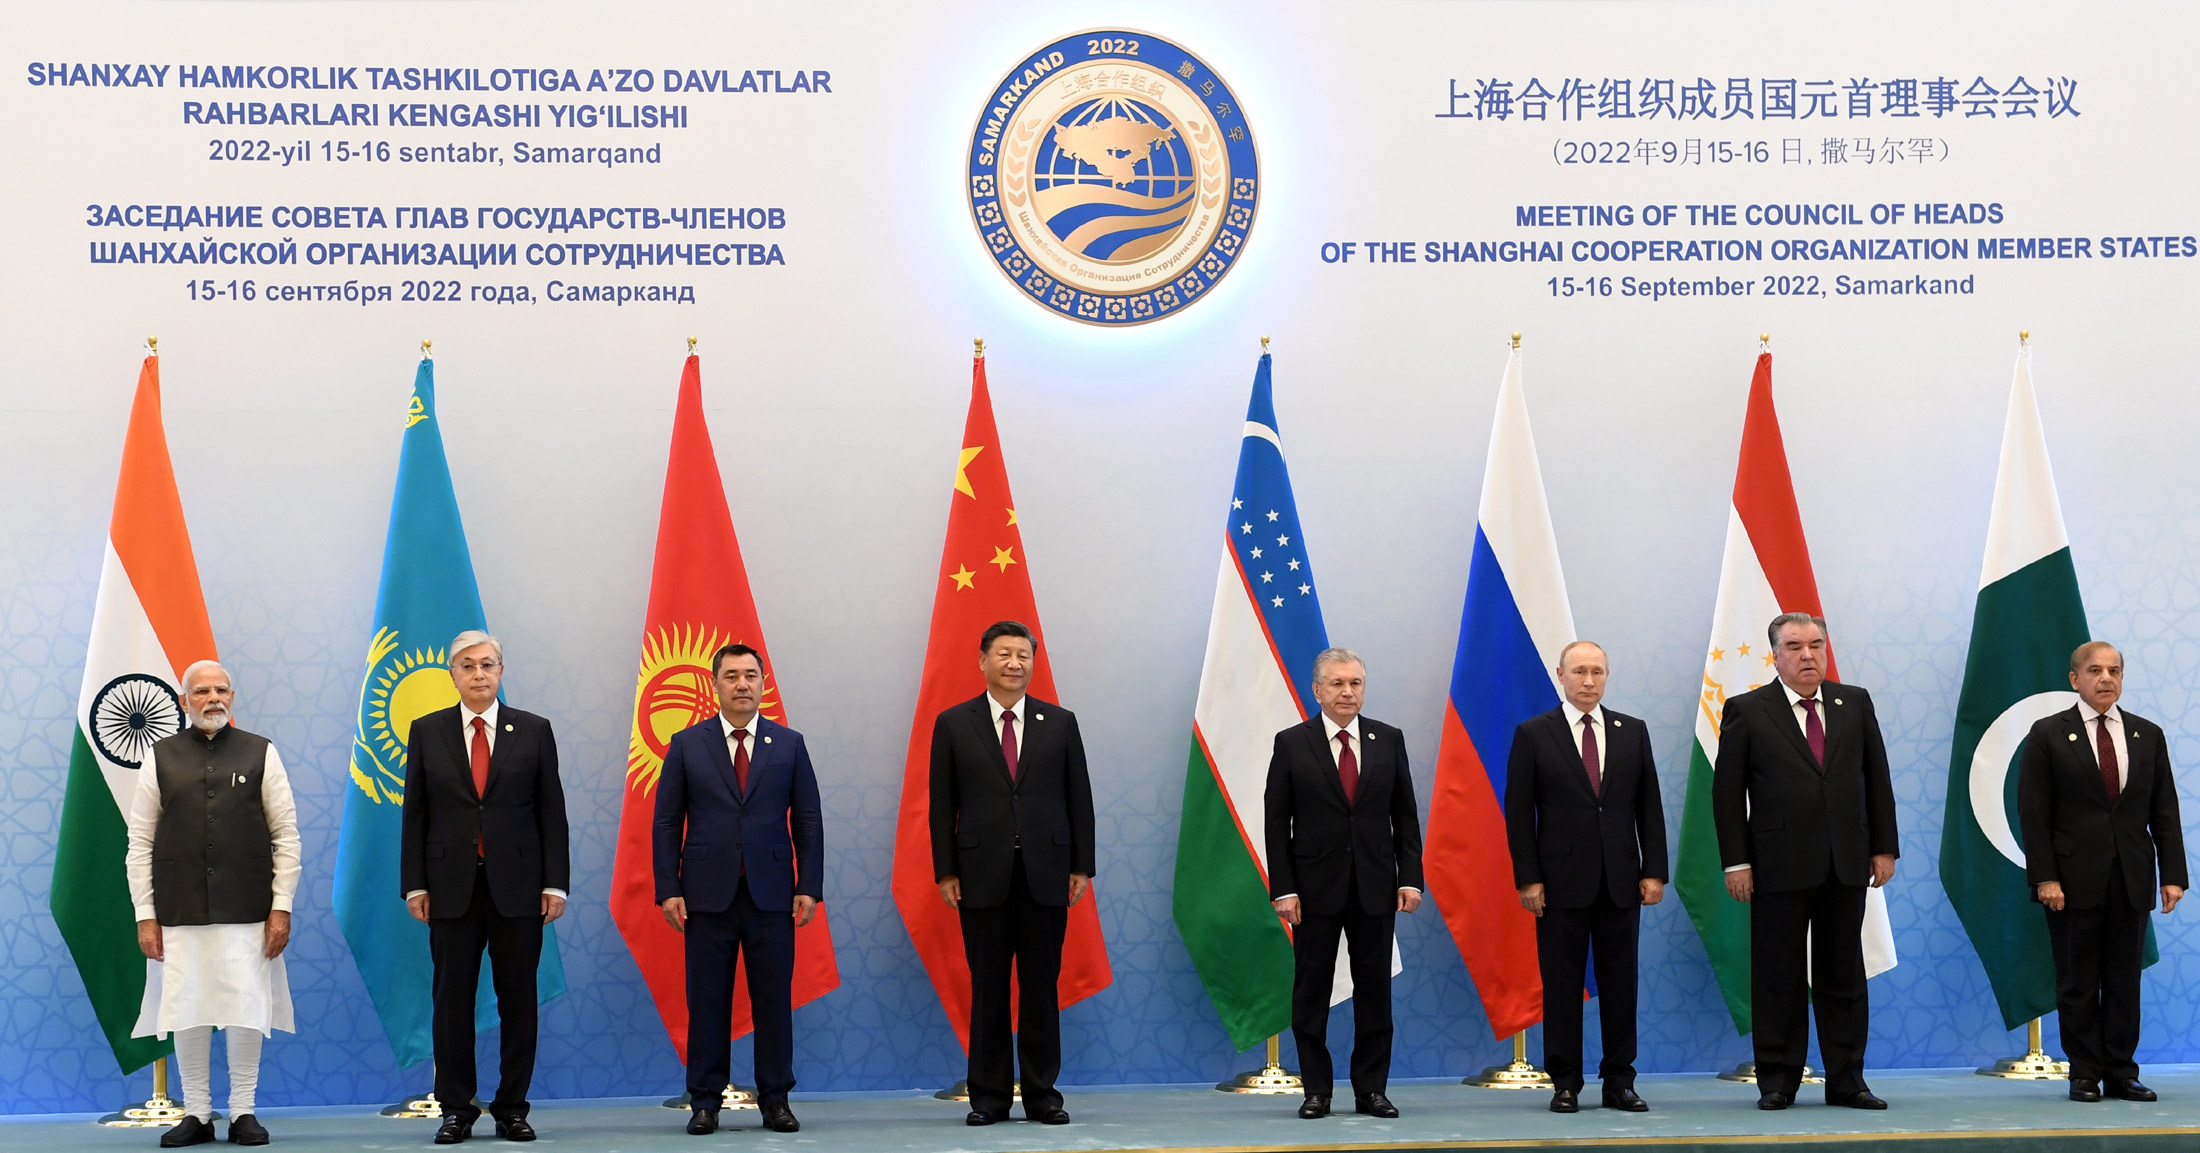 Vladimir Putin and Xi Jinping at the 2022 Shanghai Cooperation Organization (SCO) summit. The SCO is is a political, economic, and international security organization created in 2001 by China and Russia.